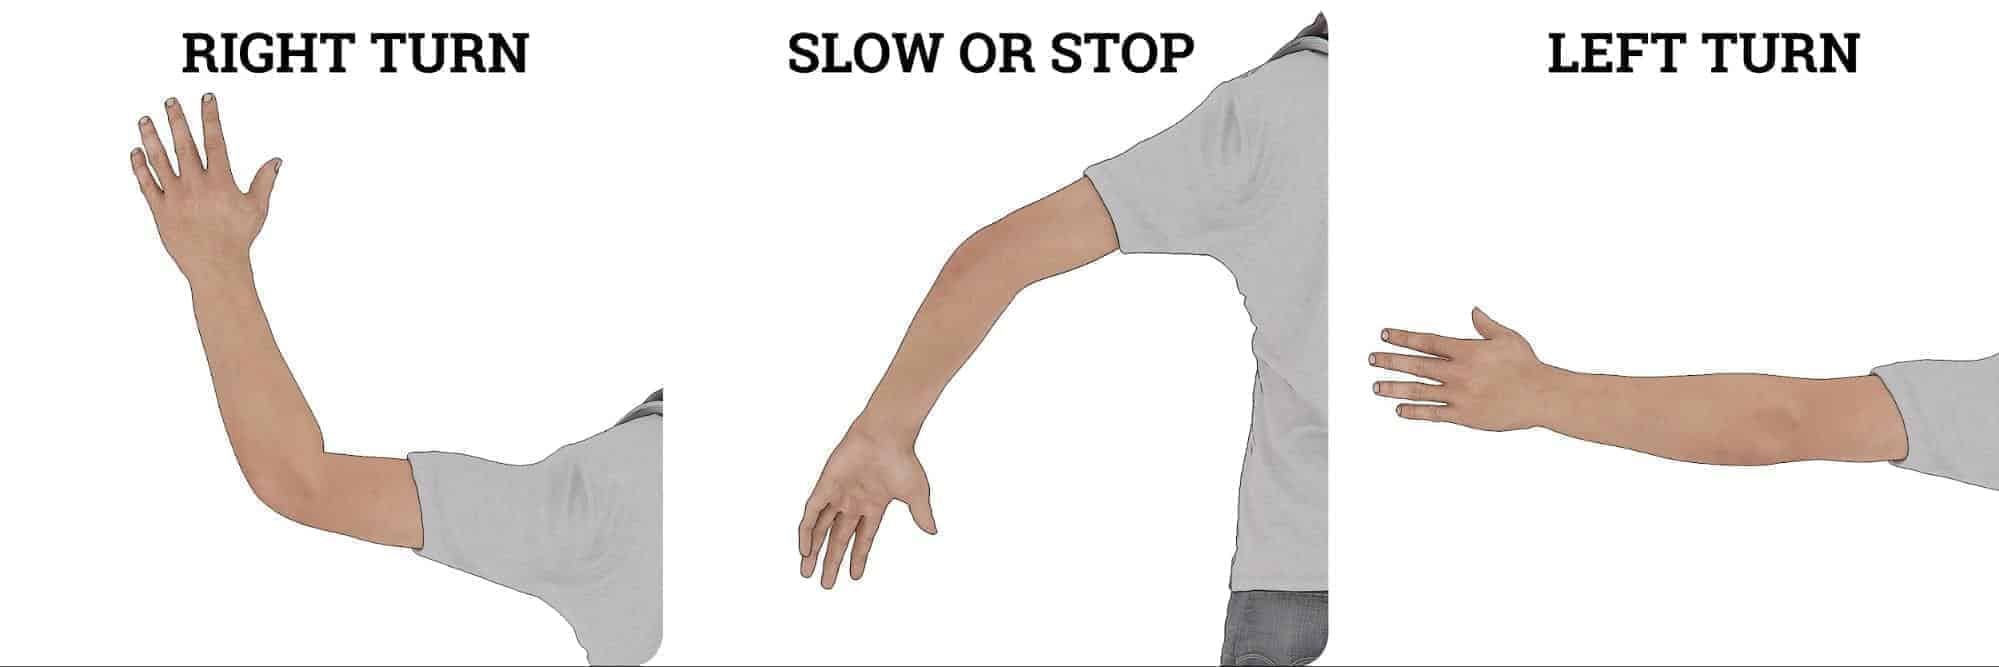 driving stop hand signal